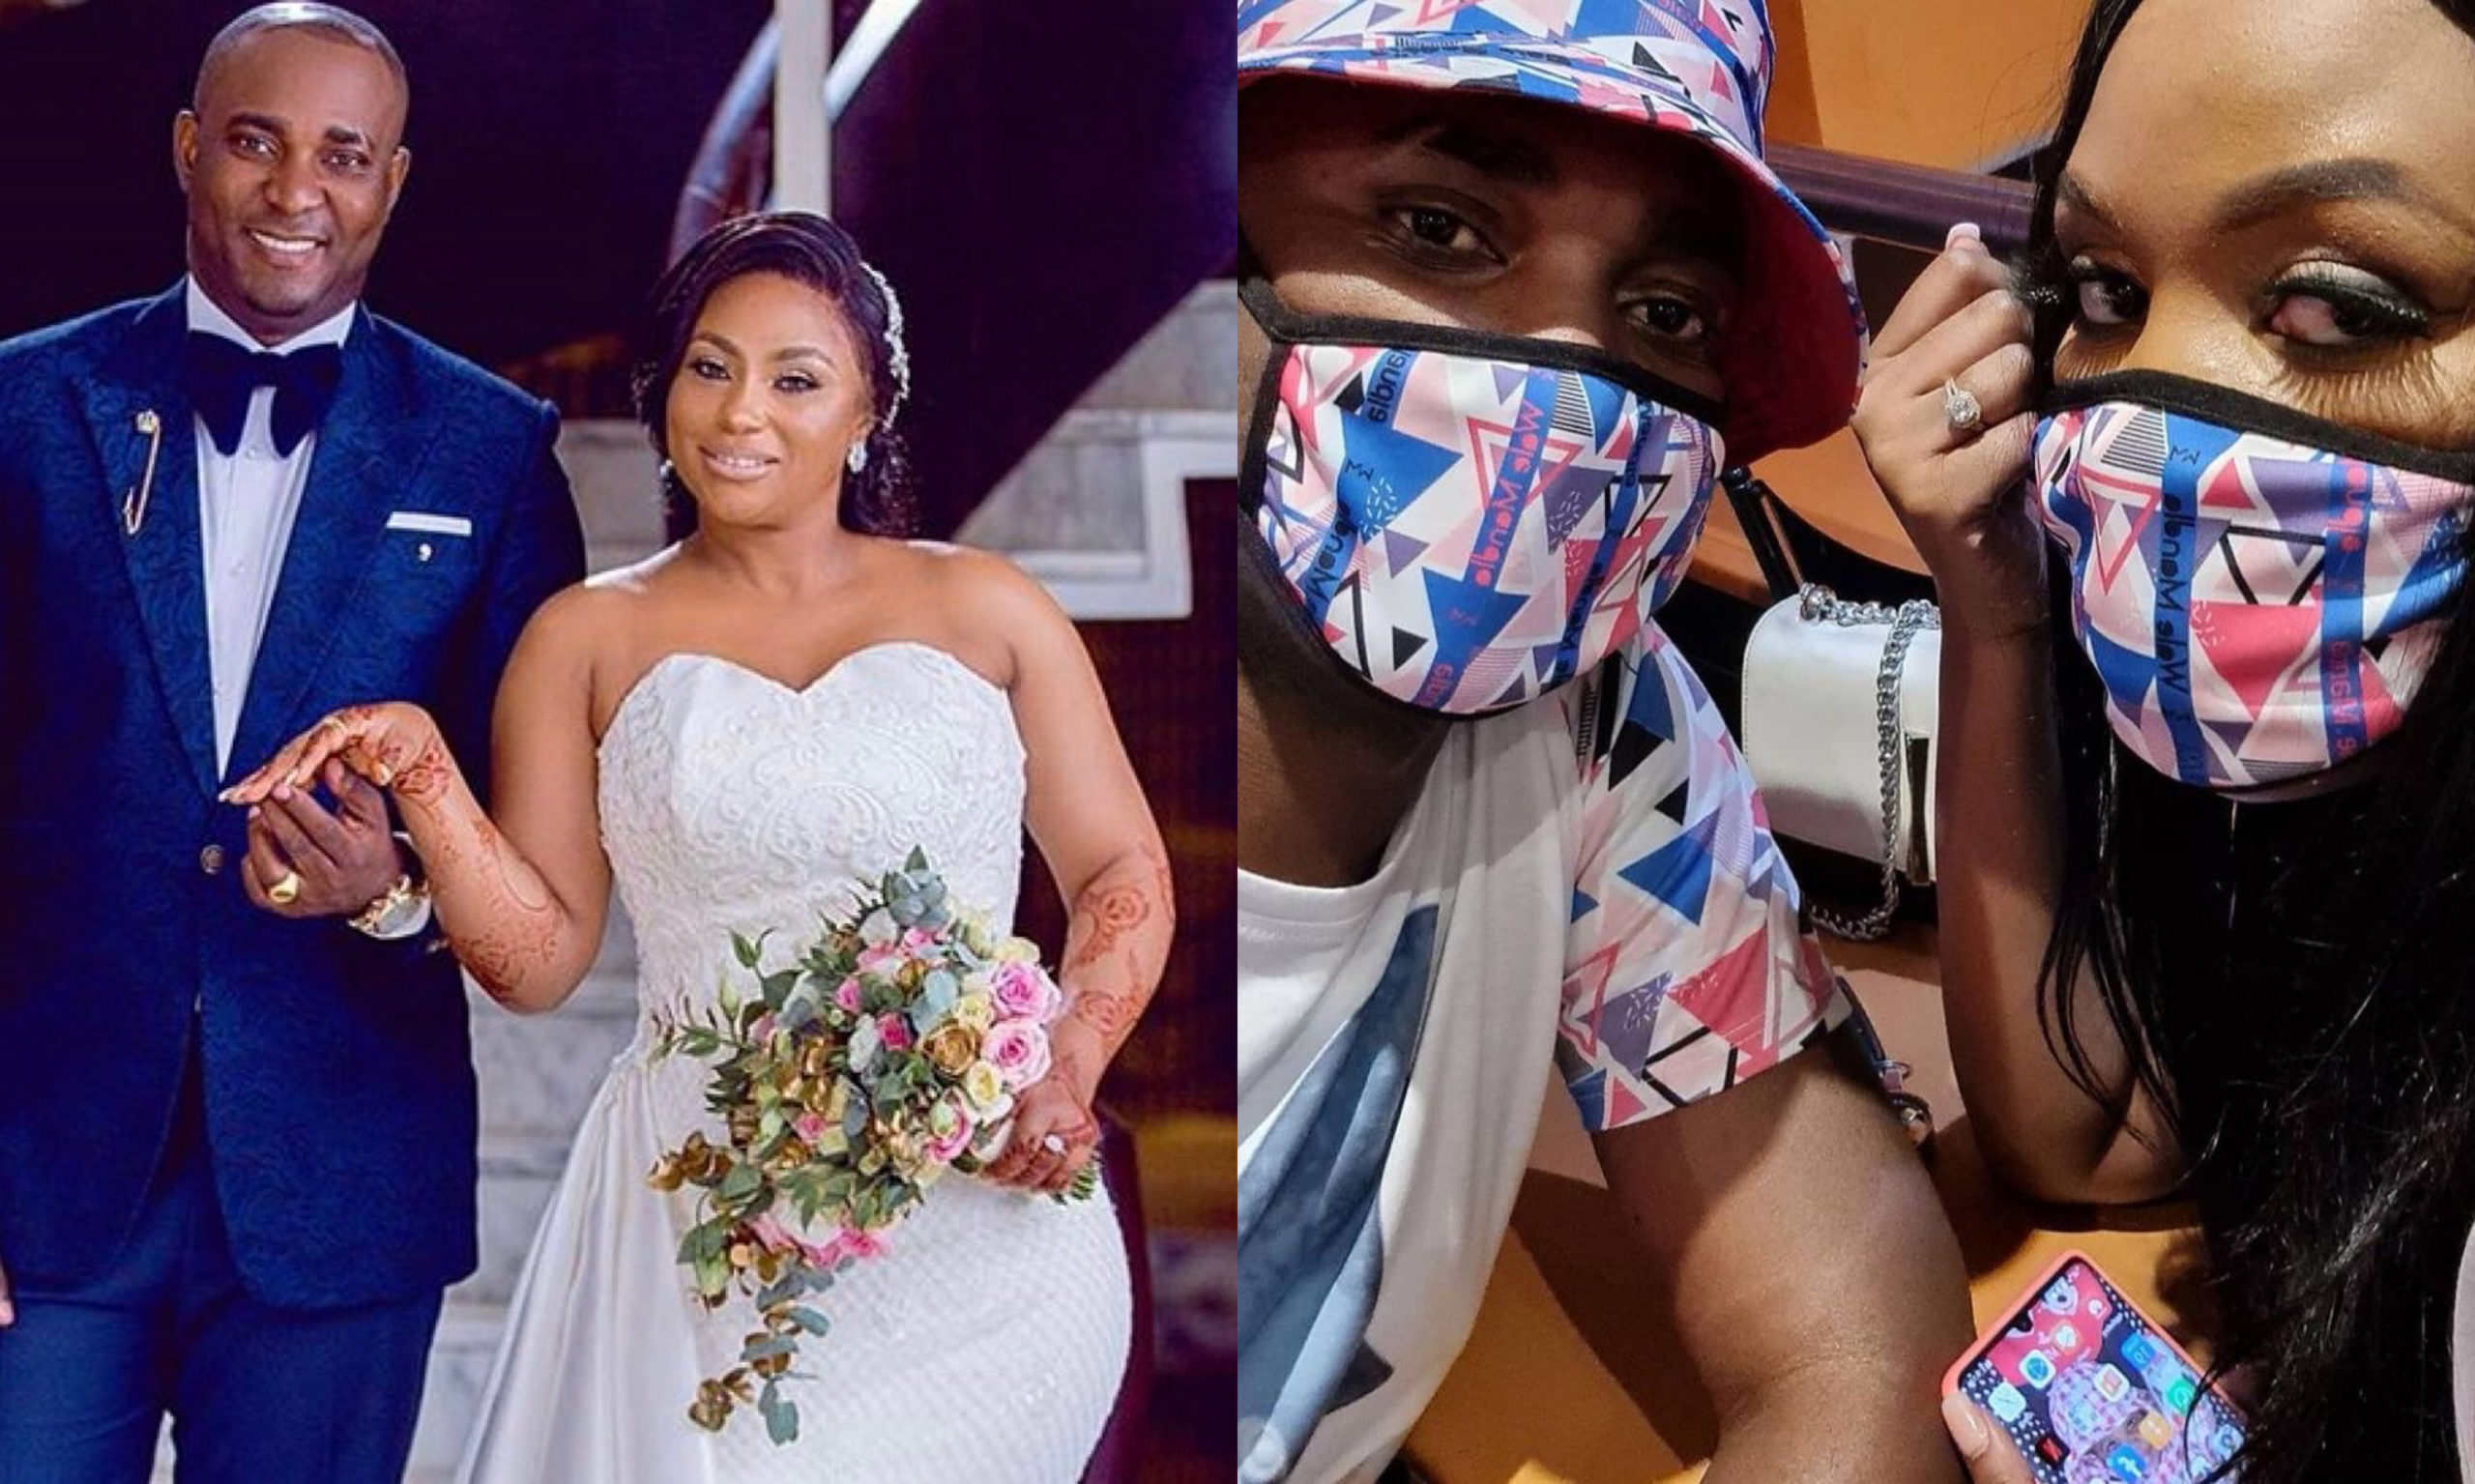 Wueh! Esma Platnumz ex-husband throwing shade after successfully reuniting with 1st wife